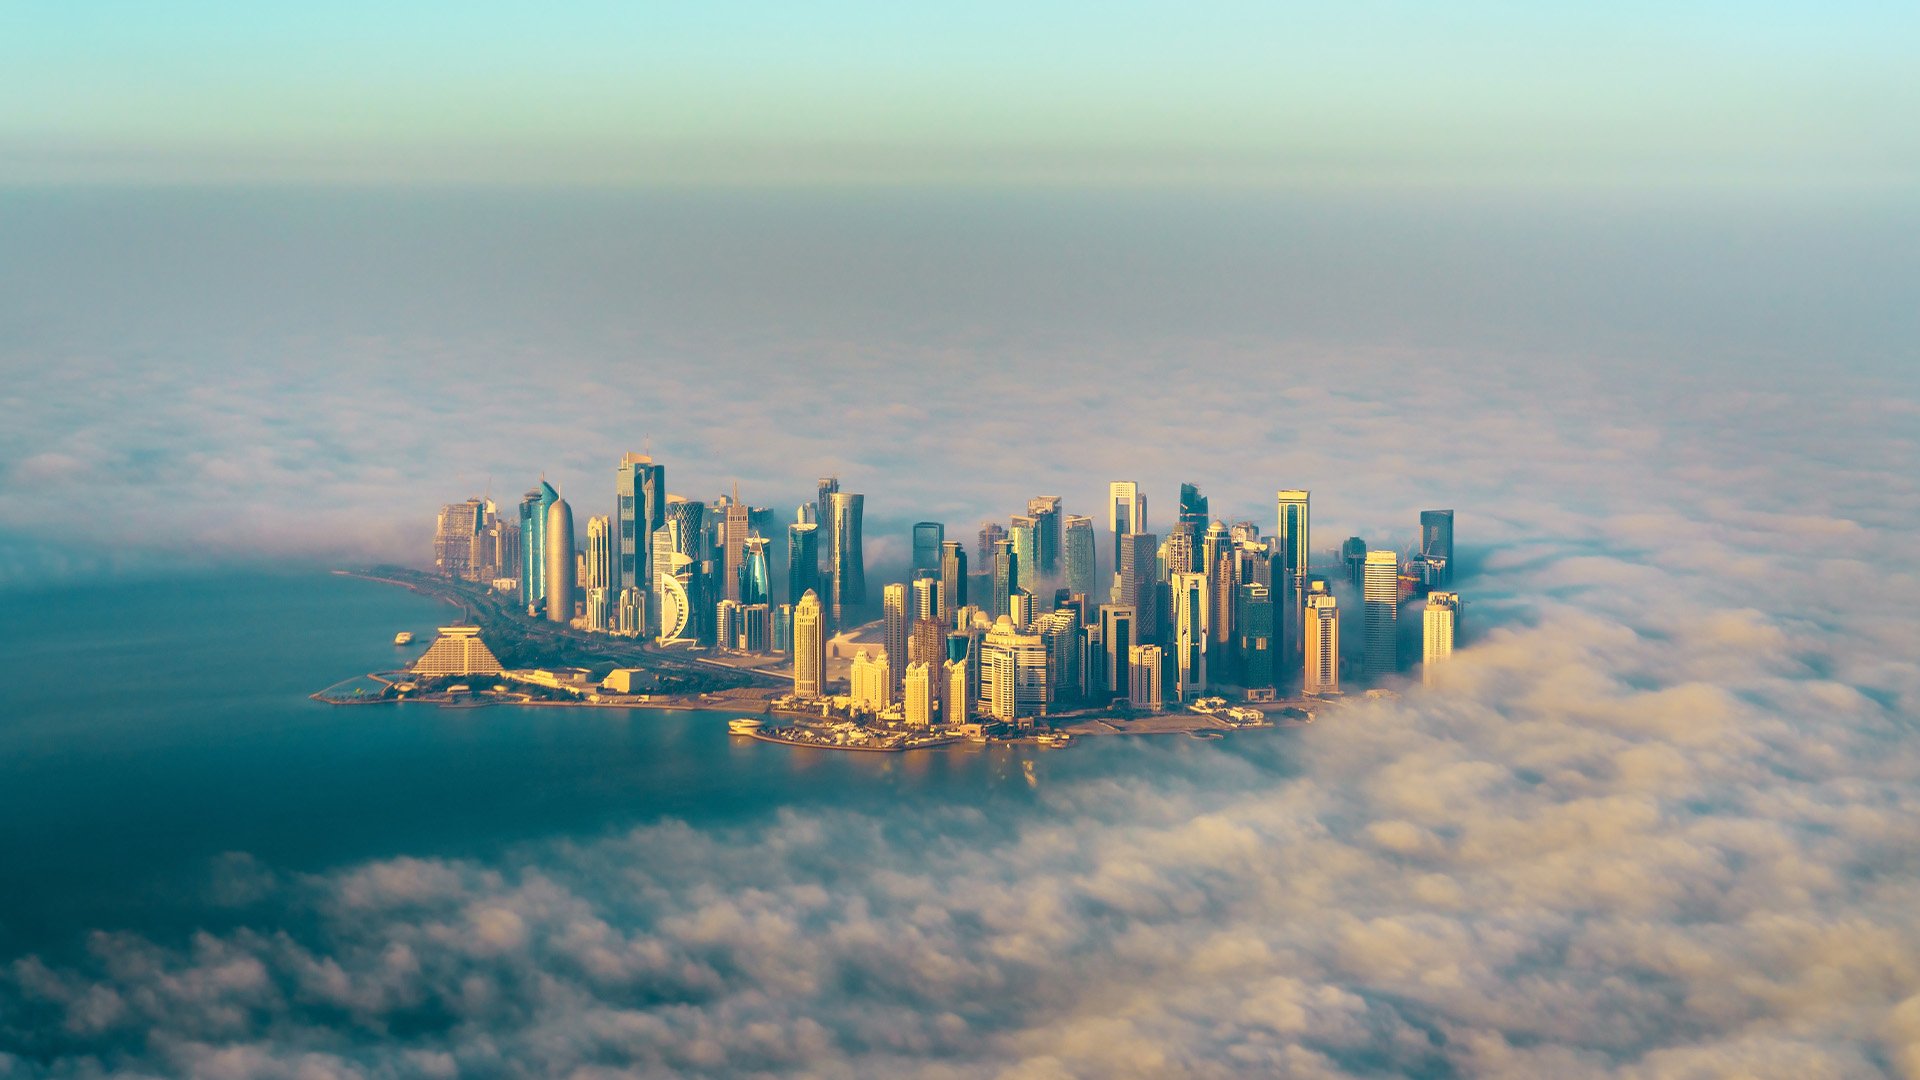 aerial view of a desert city with skyscrapers peaking through the morning fog